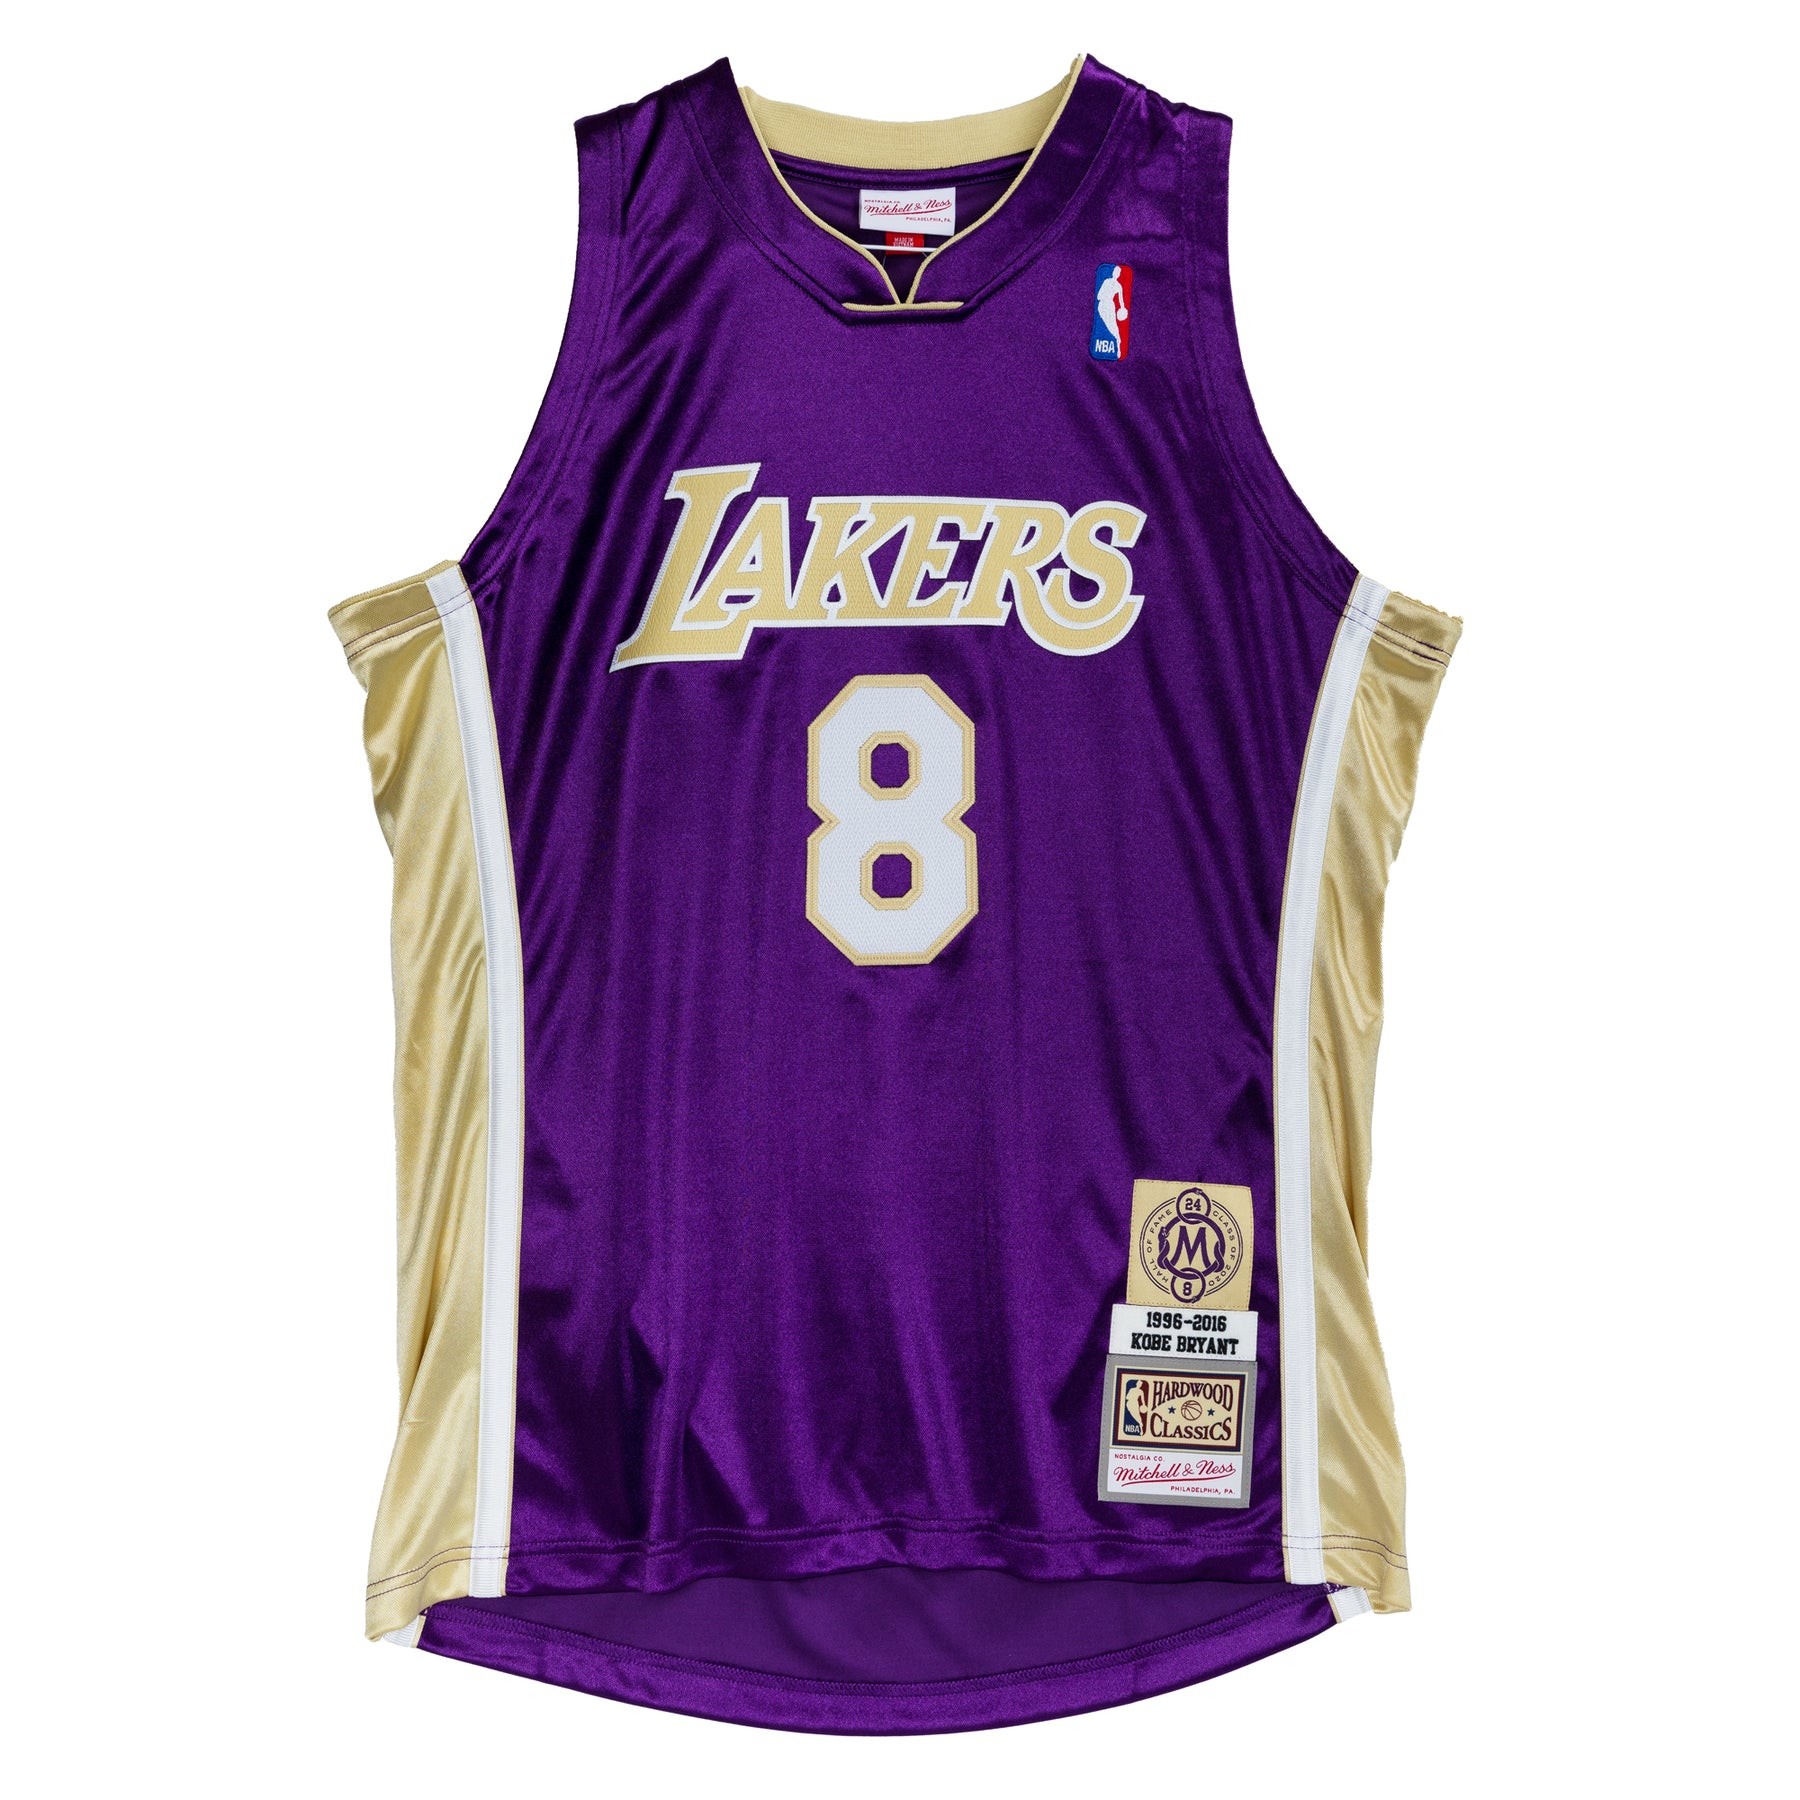 LOS ANGELES LAKERS KOBE BRYANT HALL OF FAME AUTHENTIC JERSEY  AJY4CP20021-LALGOLD96KBR